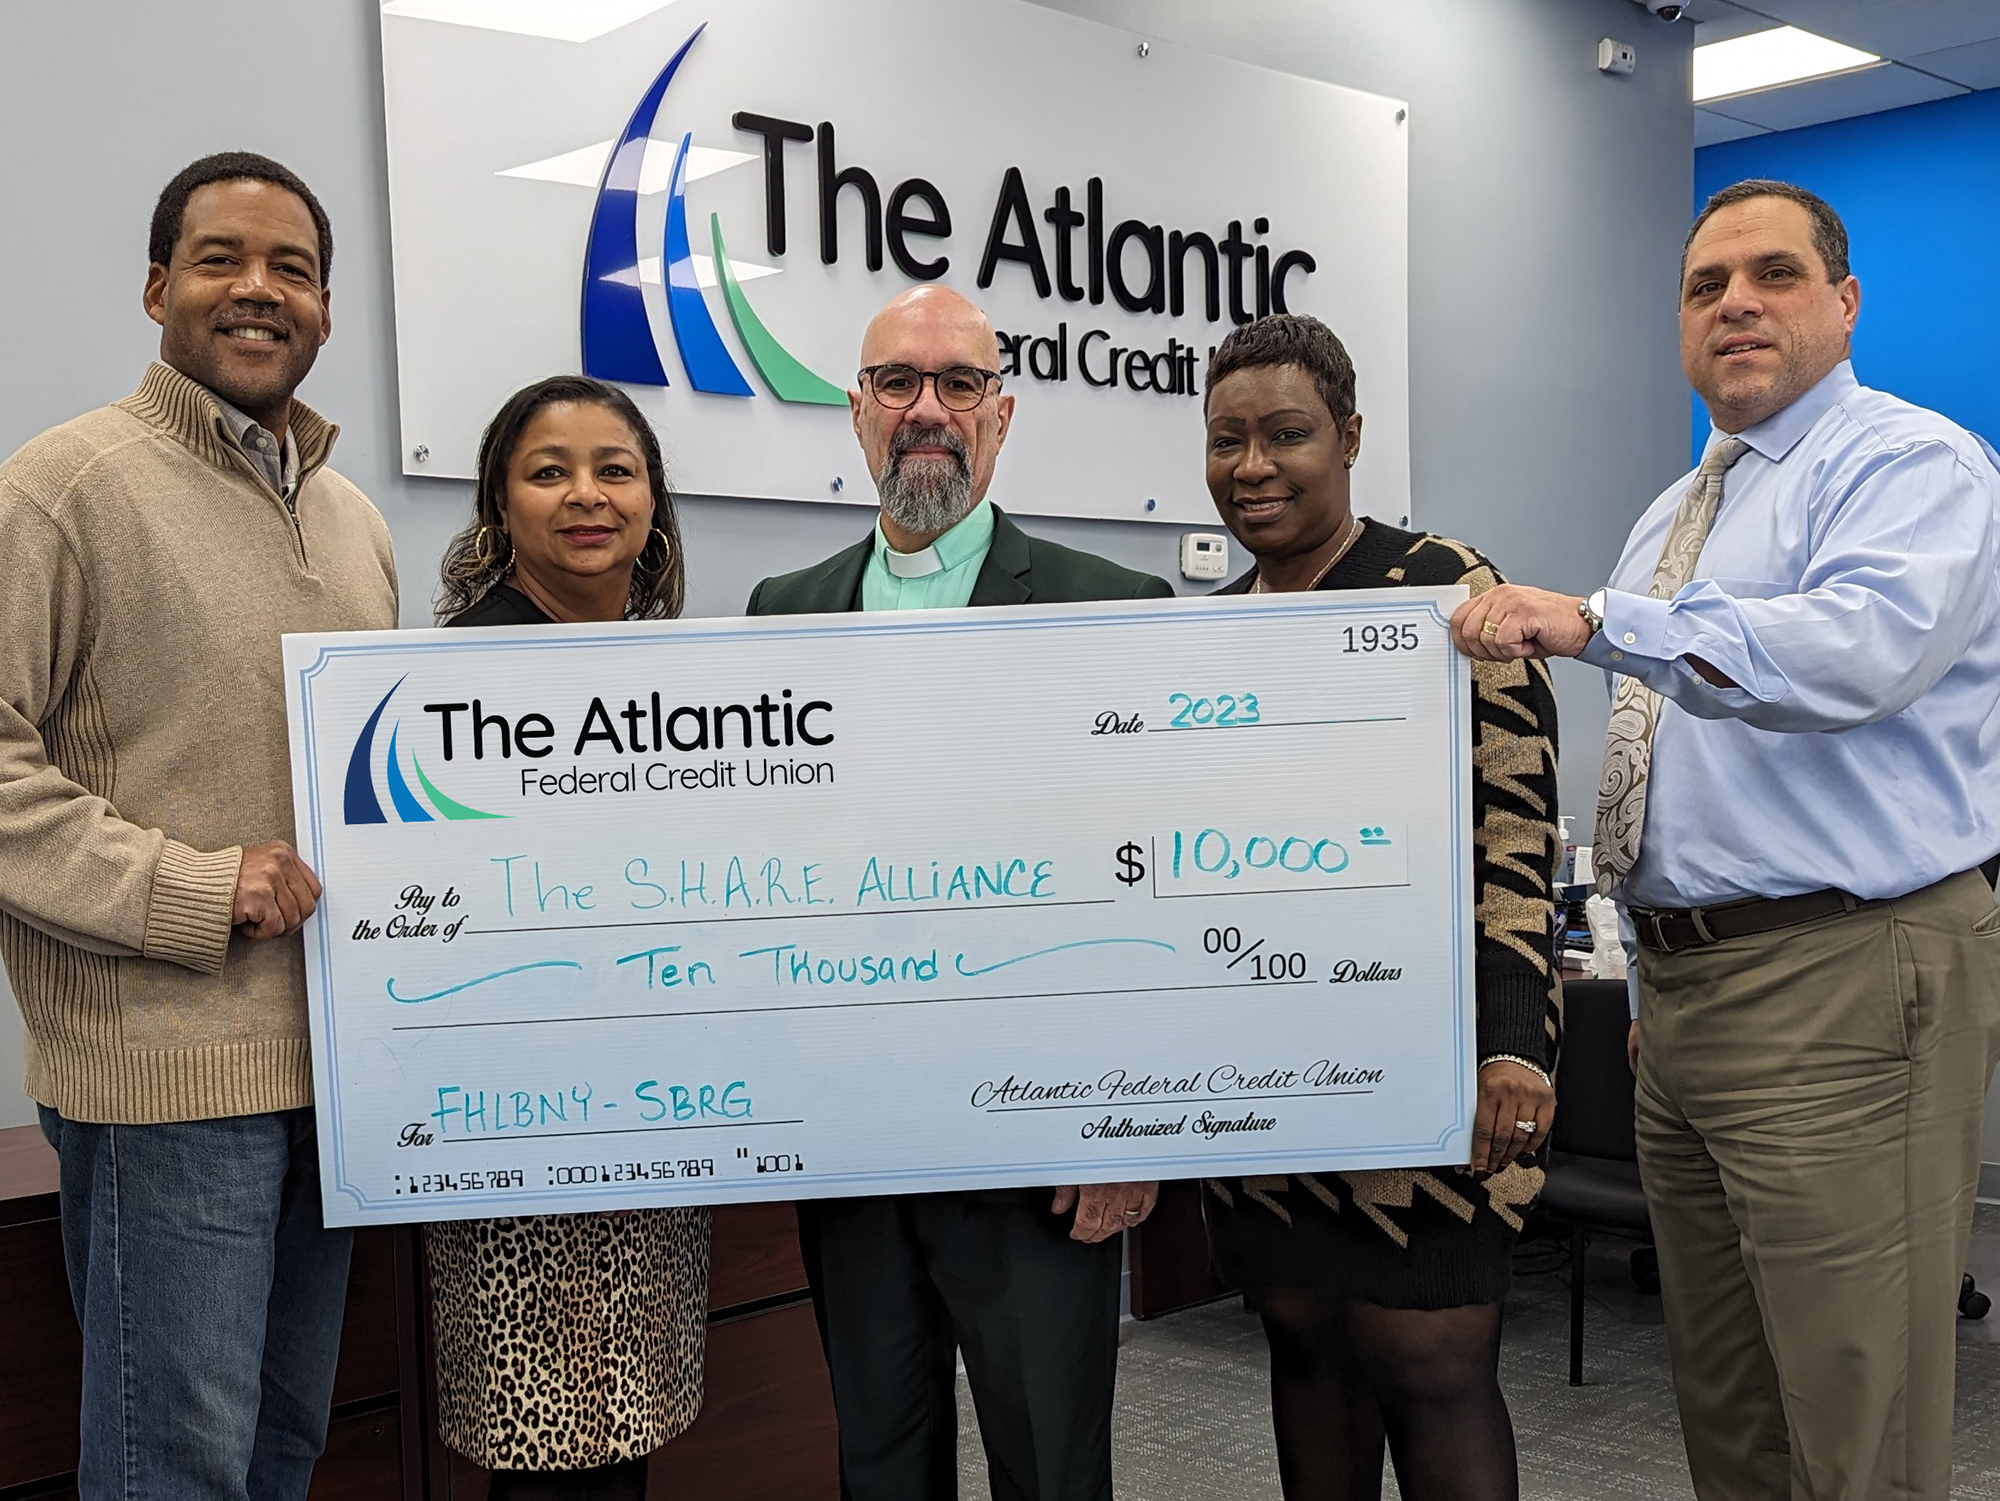 Photo of representatives from The SHARE Alliance accepting an oversized check of $10,000 through the FHLBNY SBRG from representatives of The Atlantic